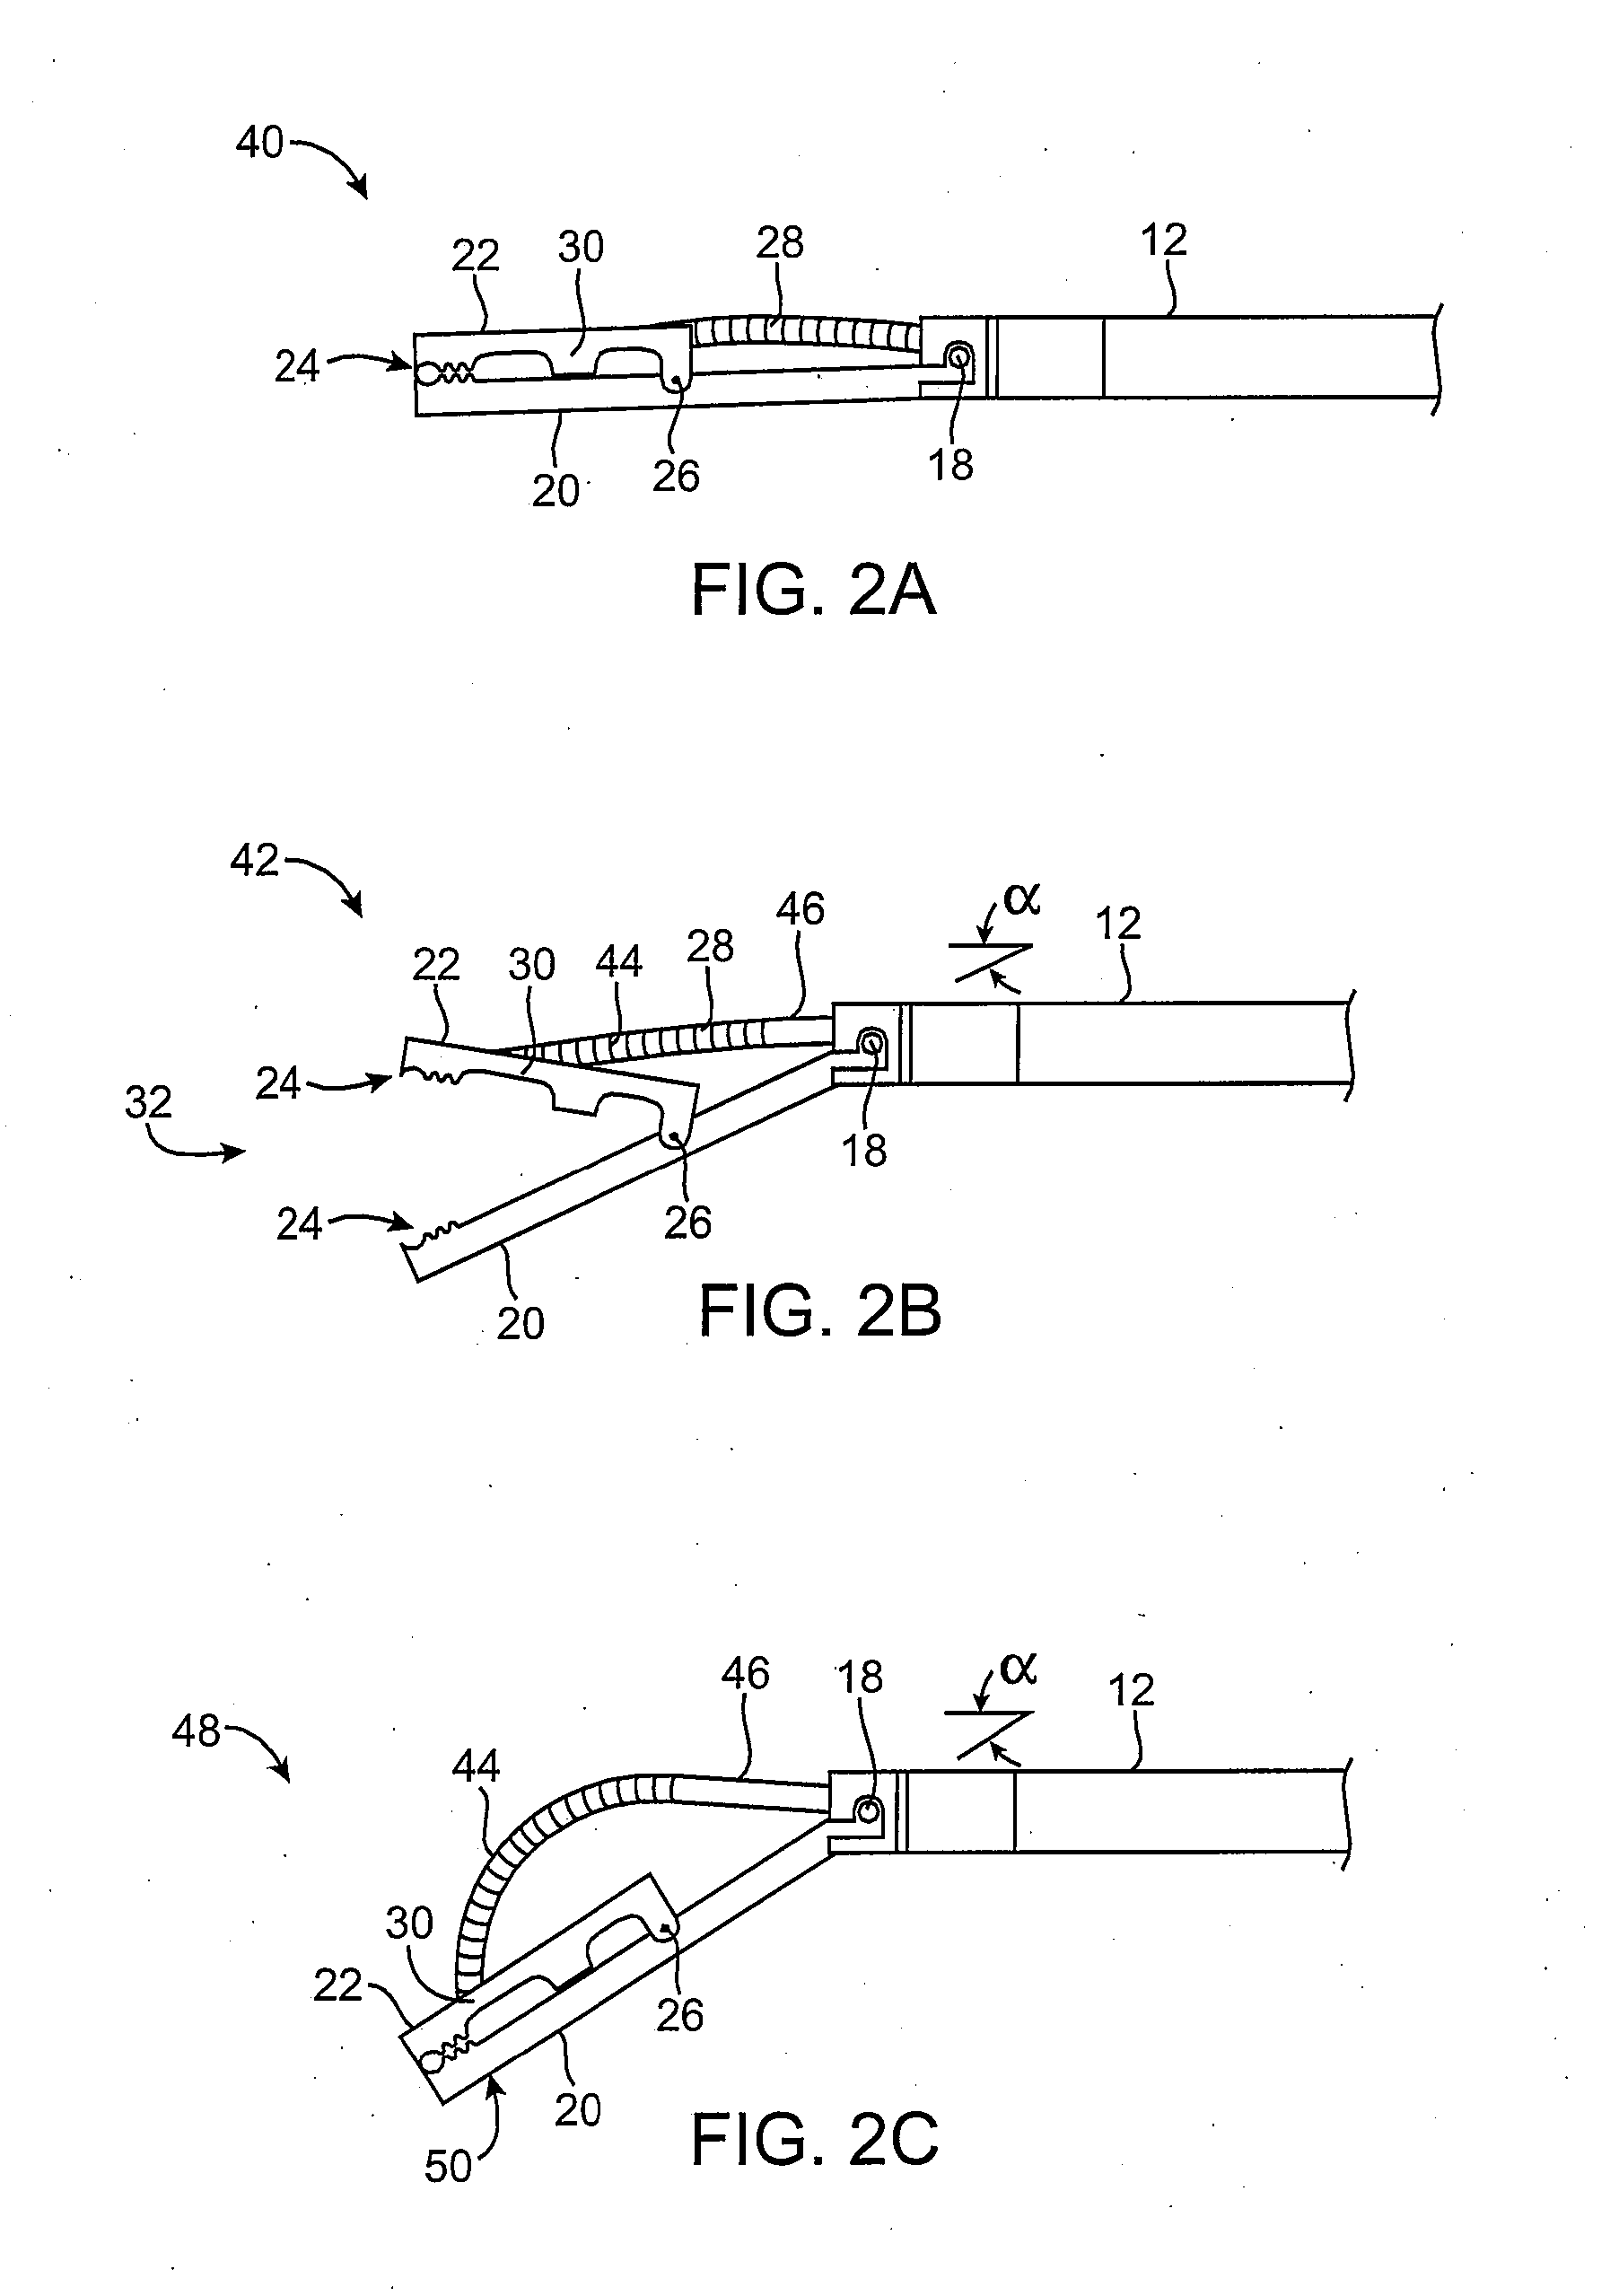 Methods and apparatus for securing and deploying tissue anchors